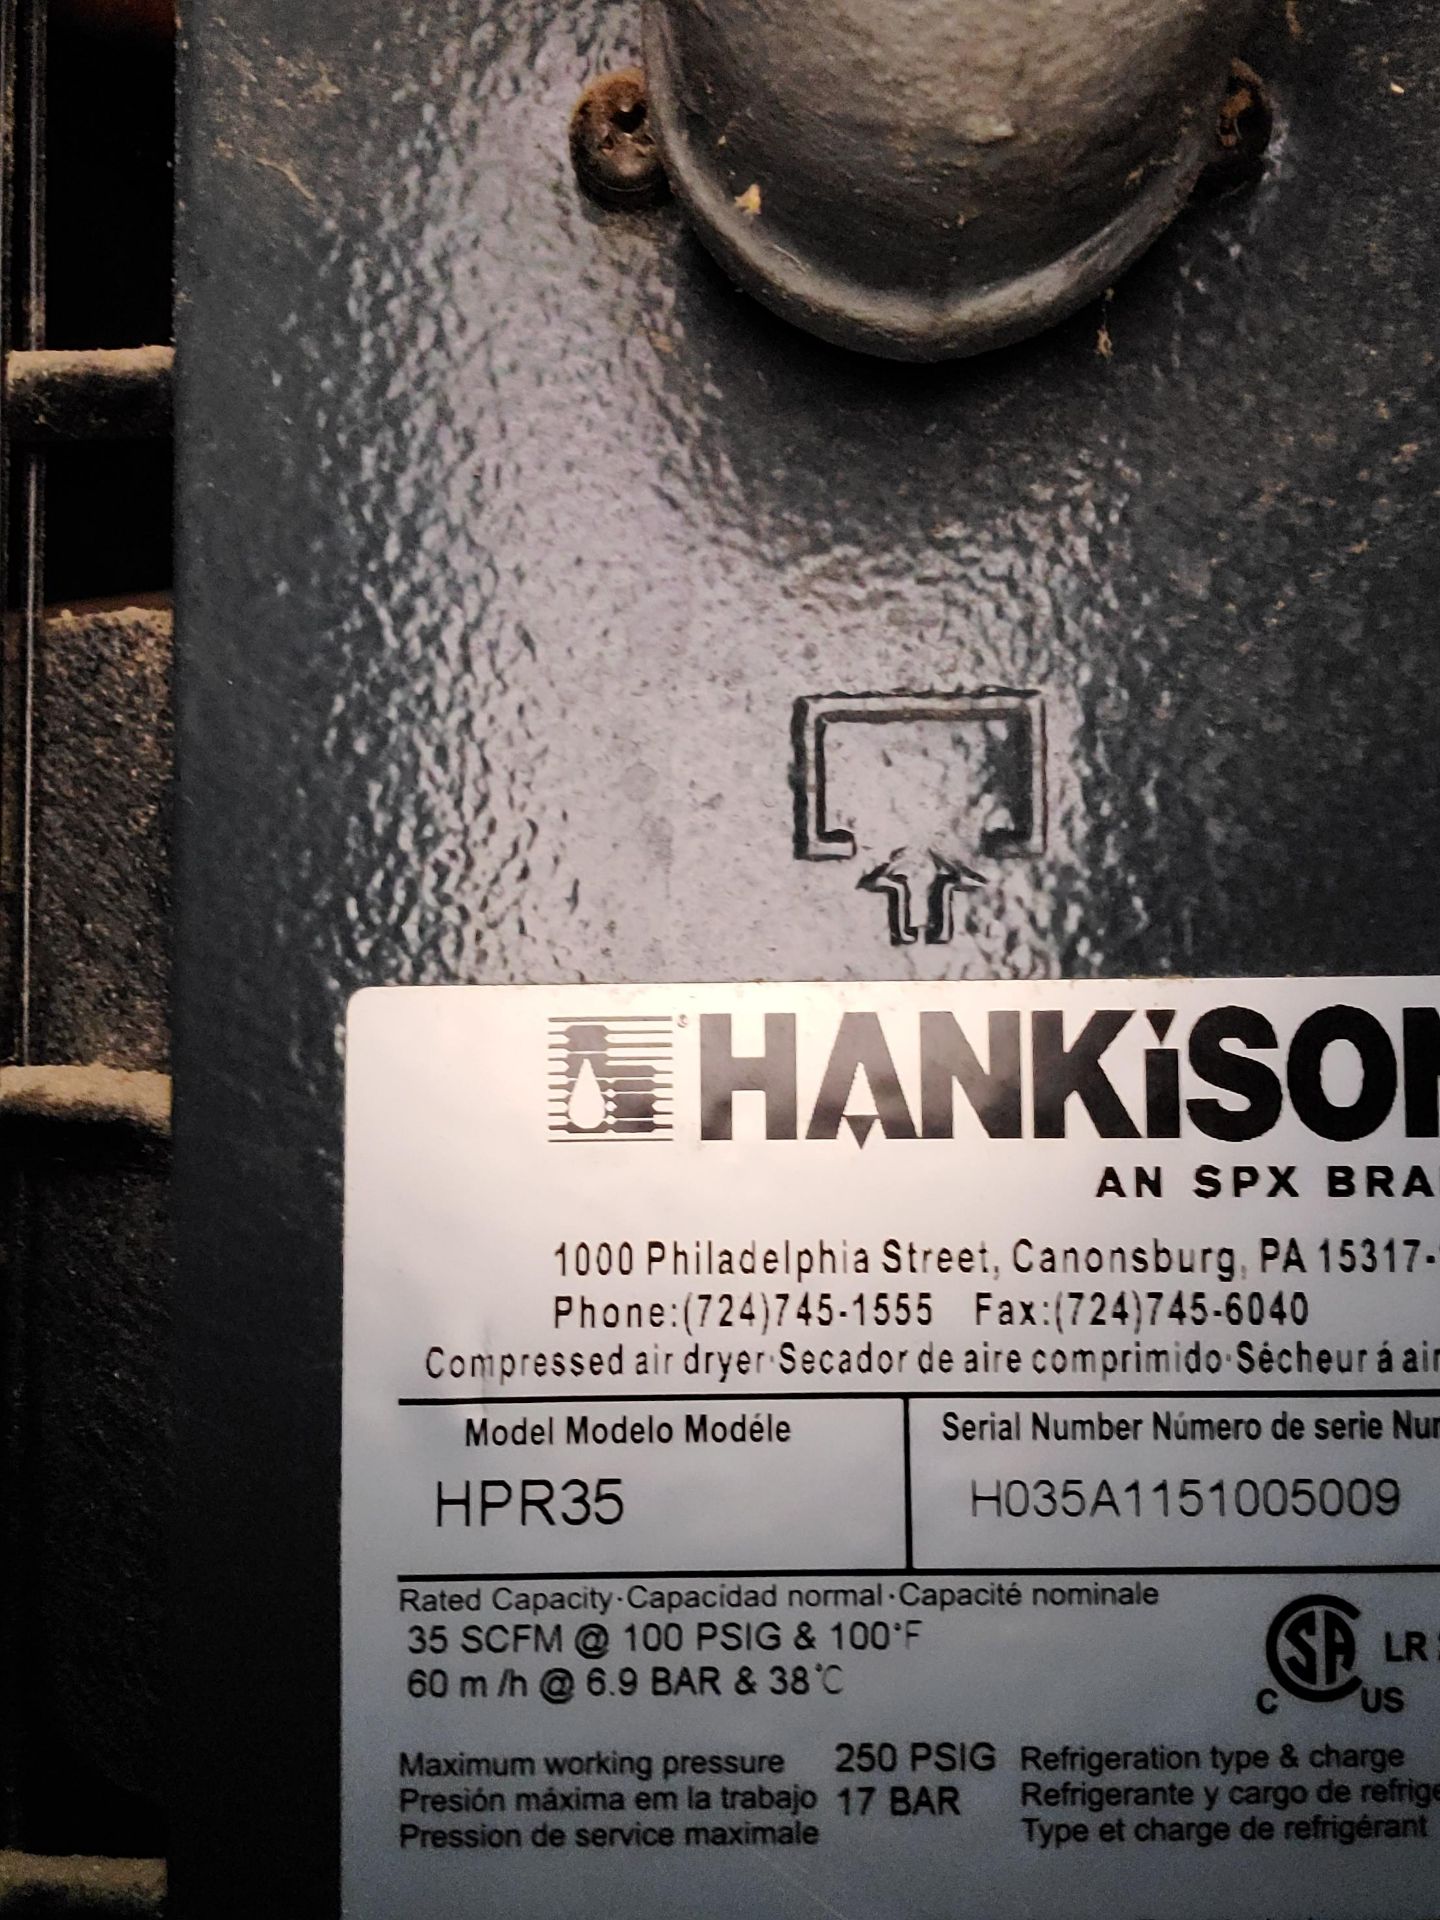 HANKISON REFRIGERATED AIR DRYER, MODEL HPR35, S/N H035A1151005009, 115V, SINGLE PHASE - Image 2 of 2